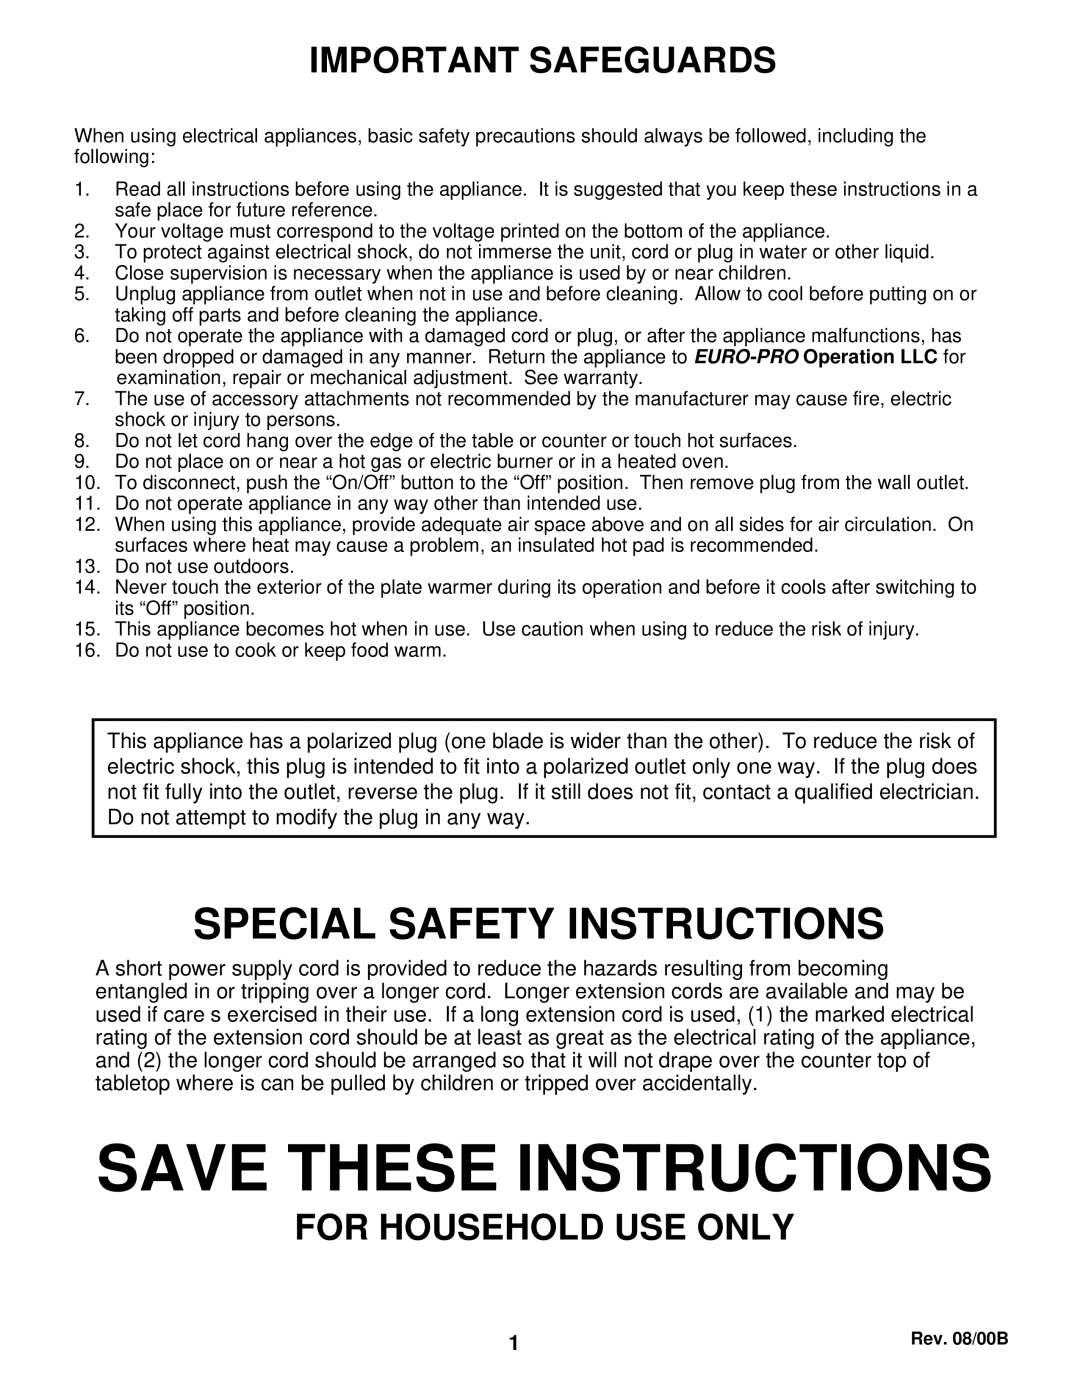 Bravetti BR220 manual Special Safety Instructions, Save These Instructions, Important Safeguards, For Household Use Only 